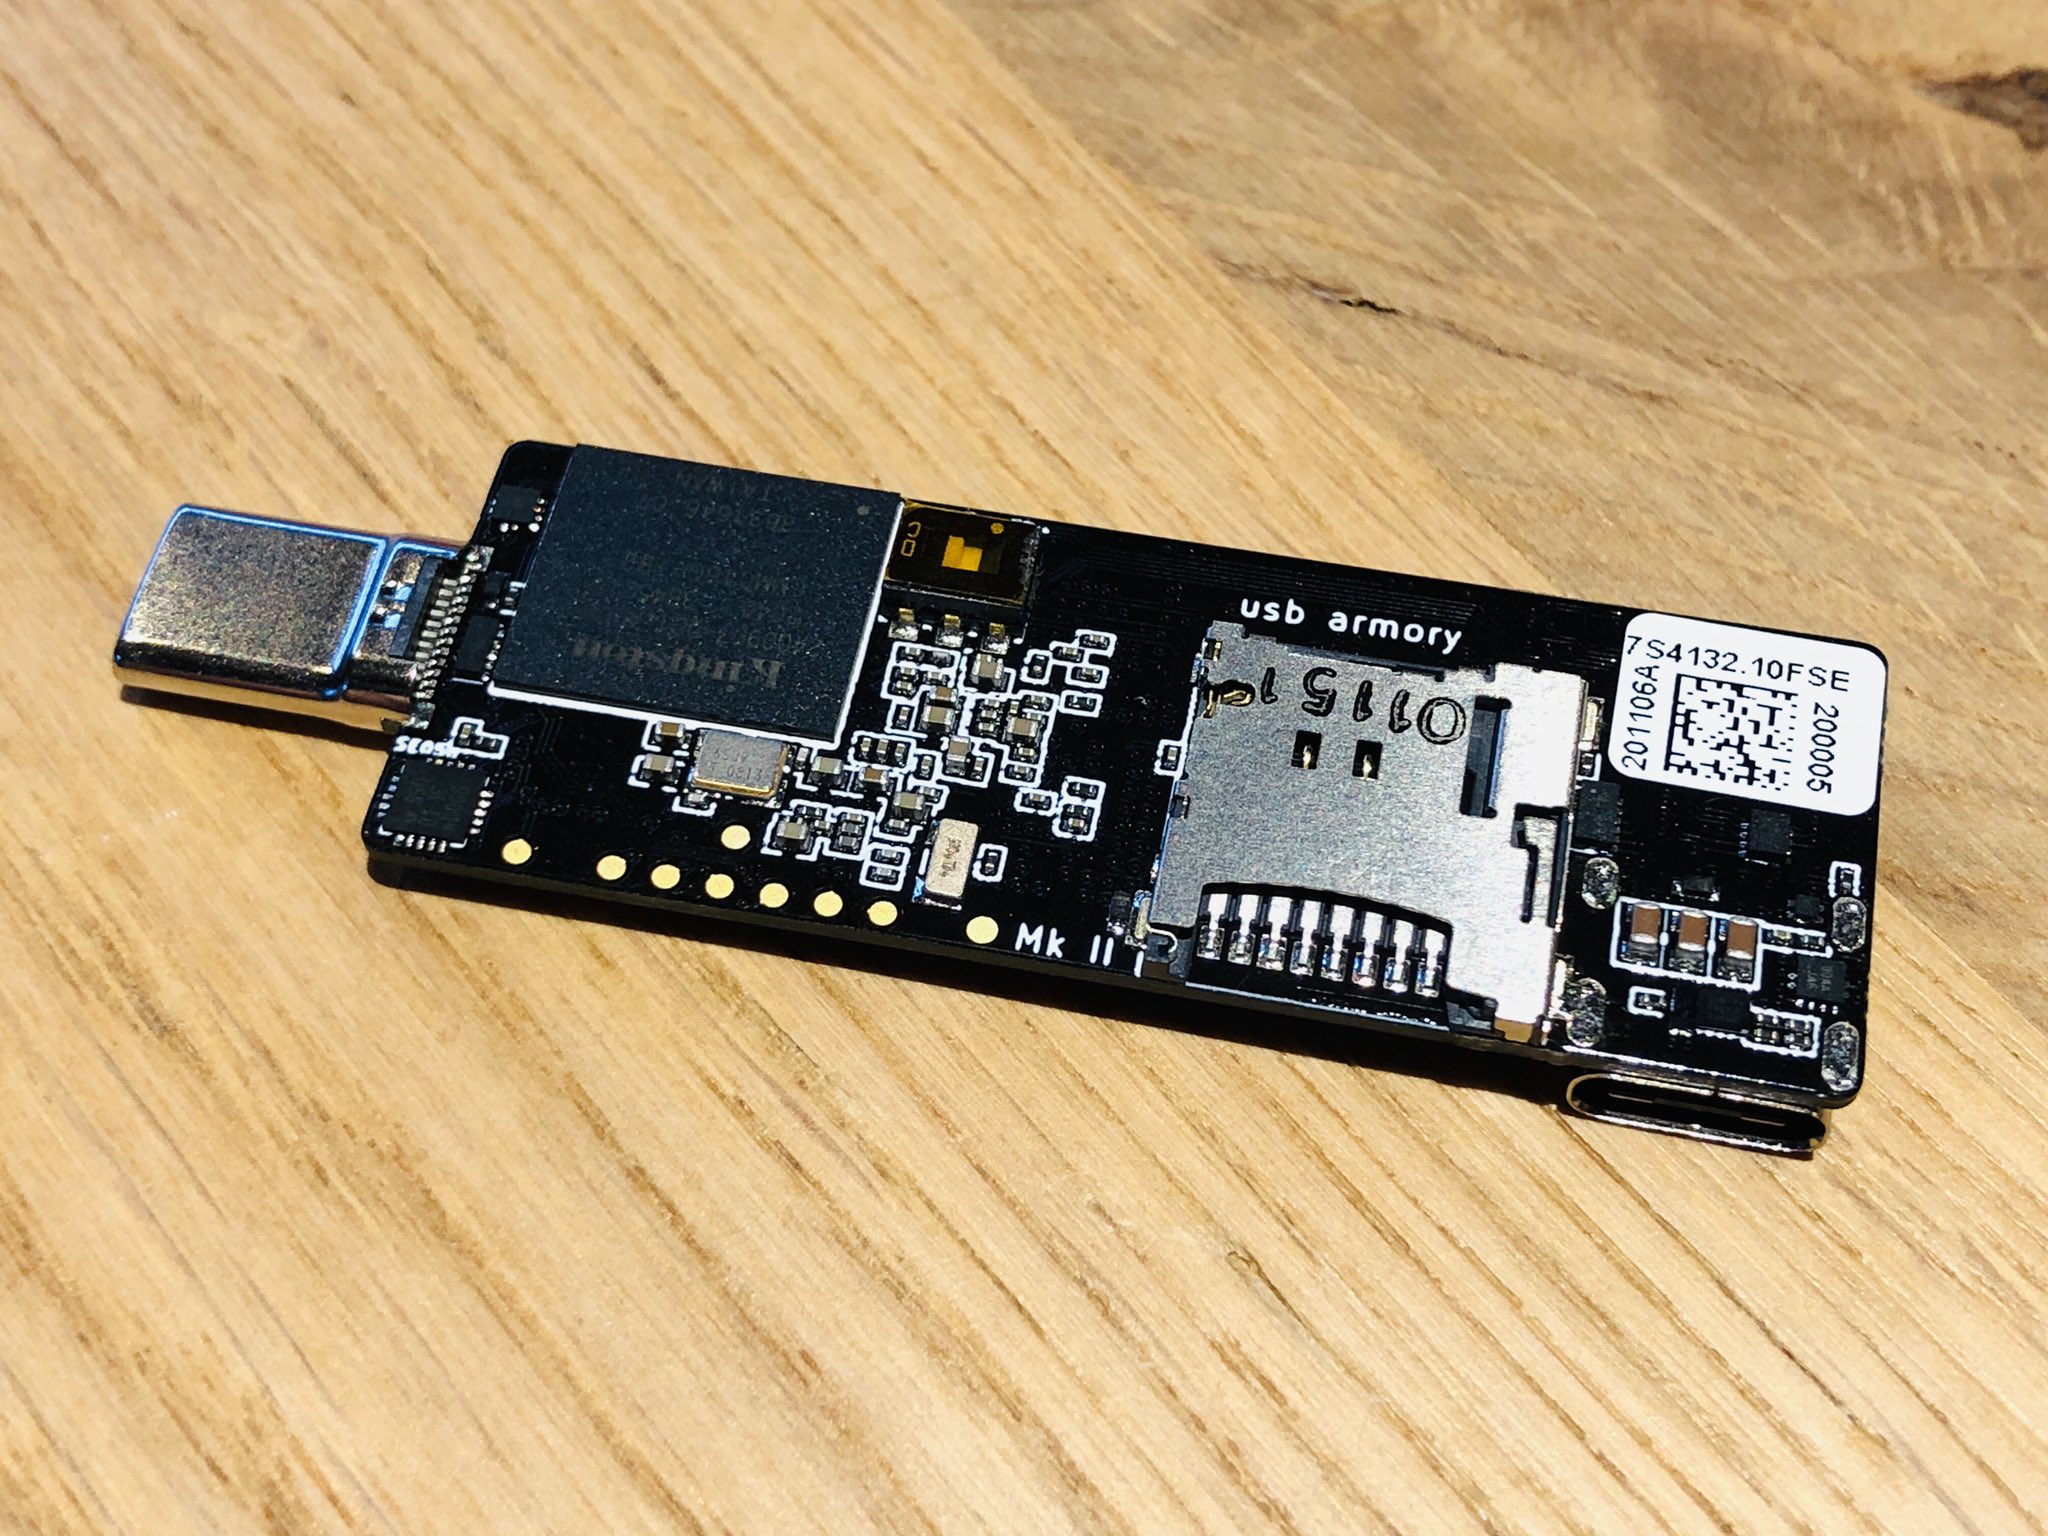 mikko Twitter: "WithSecure's USB armory does post-quantum cryptography in space. Because in space, no one can here you do post-quantum cryptography. https://t.co/9FIVWl3n2q https://t.co/nZMqje7QGY" /